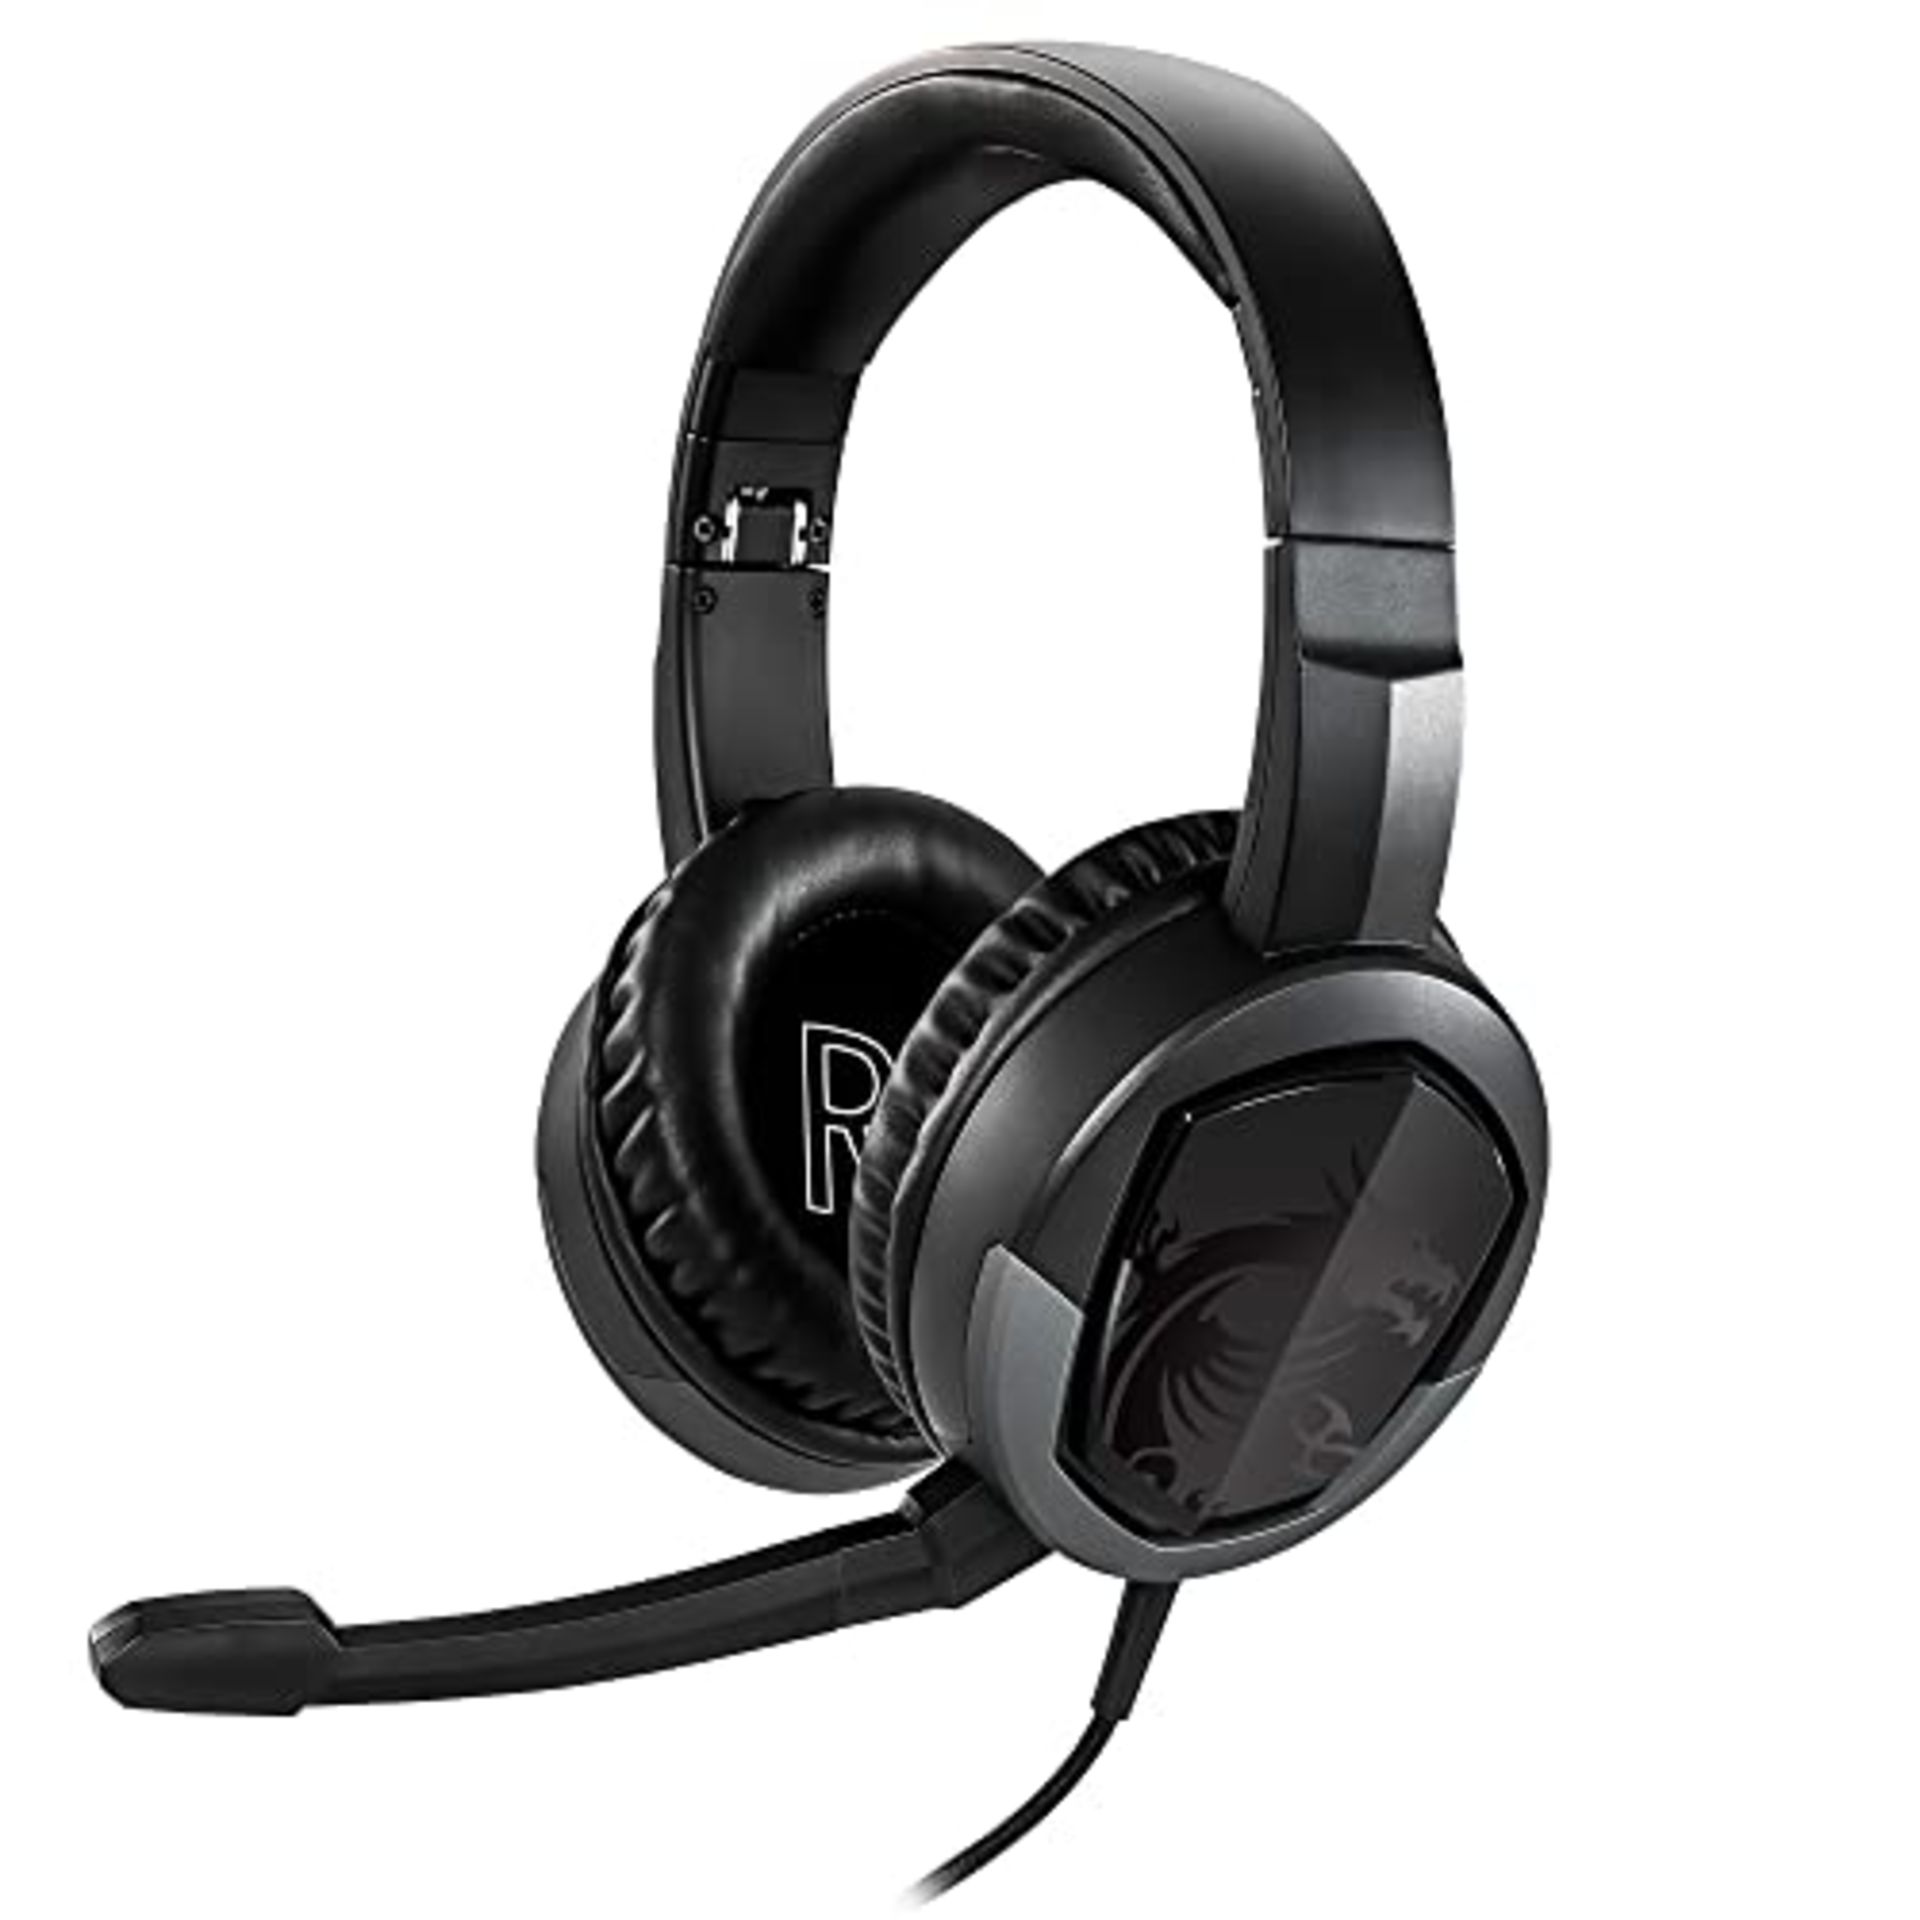 MSI IMMERSE GH30 V2 GAMING HEADSET - Stereo headphones, lightweight and foldable desig